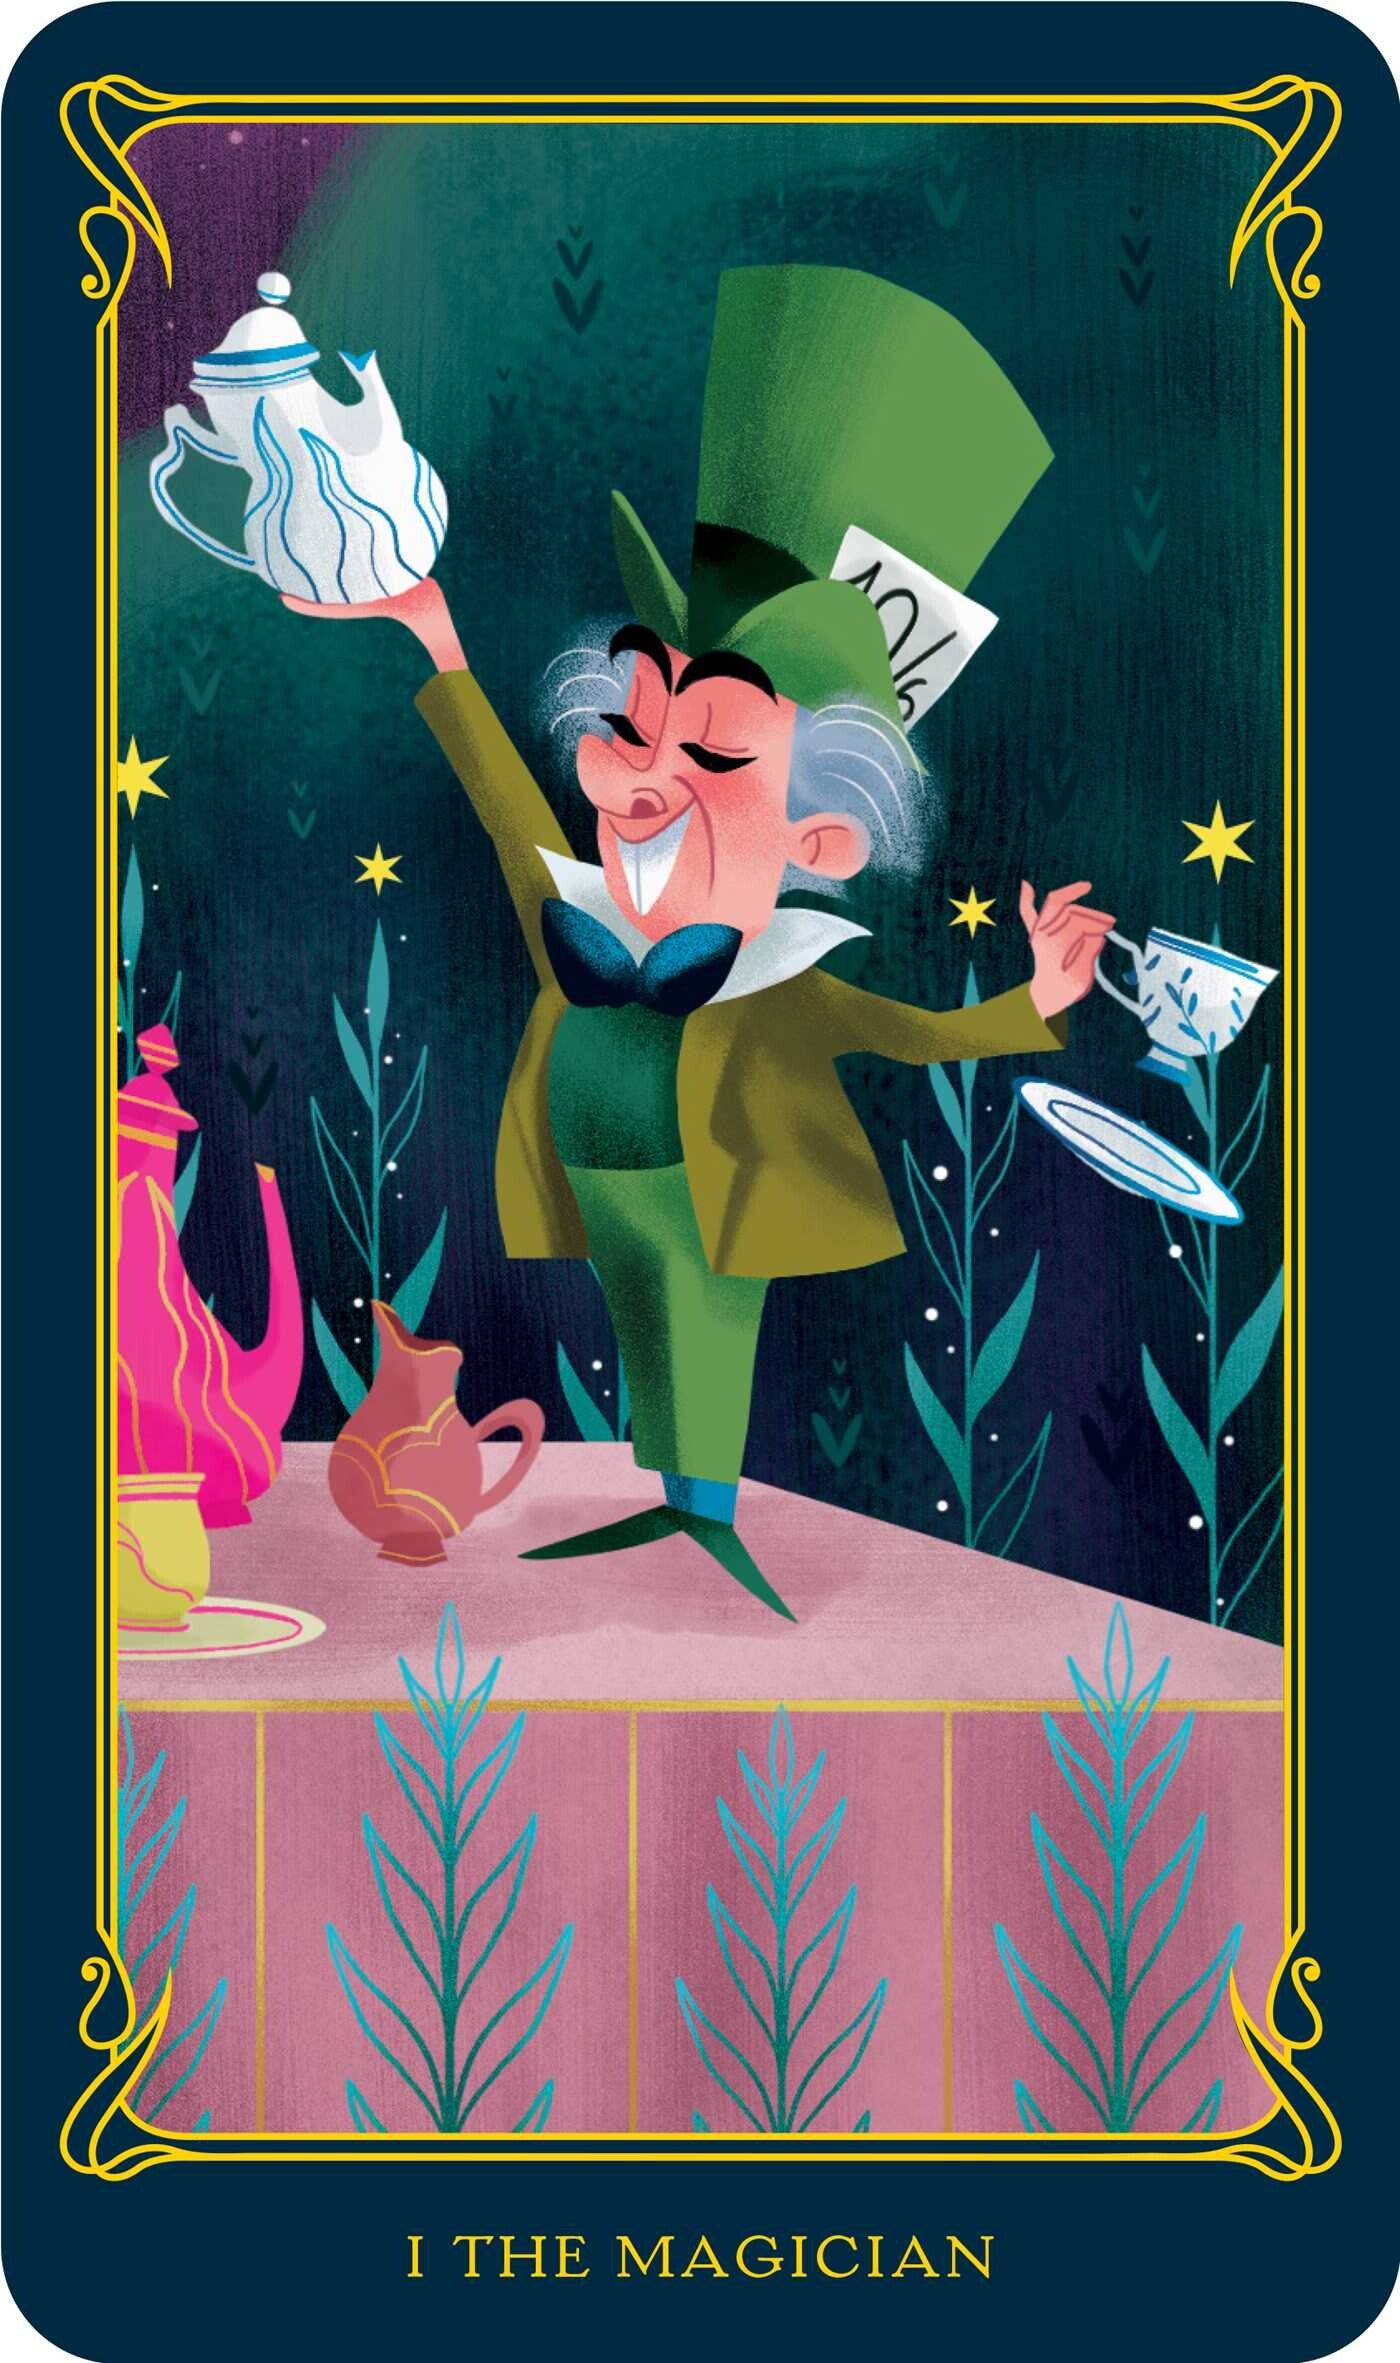 The Magician (Mad Hatter) card 